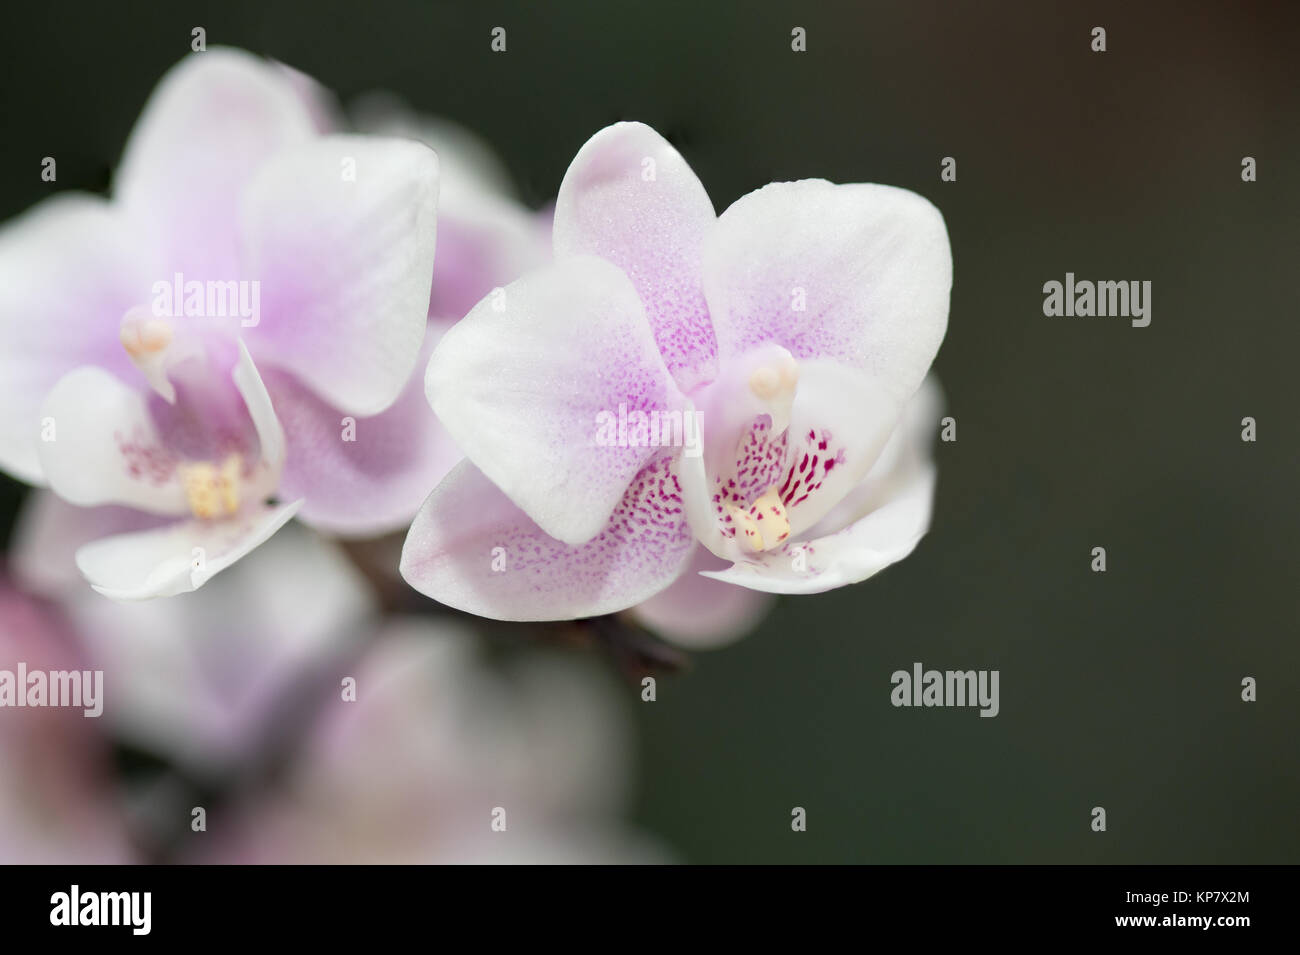 Phalaenopsis Orchid White Color On Vine Stock Photo